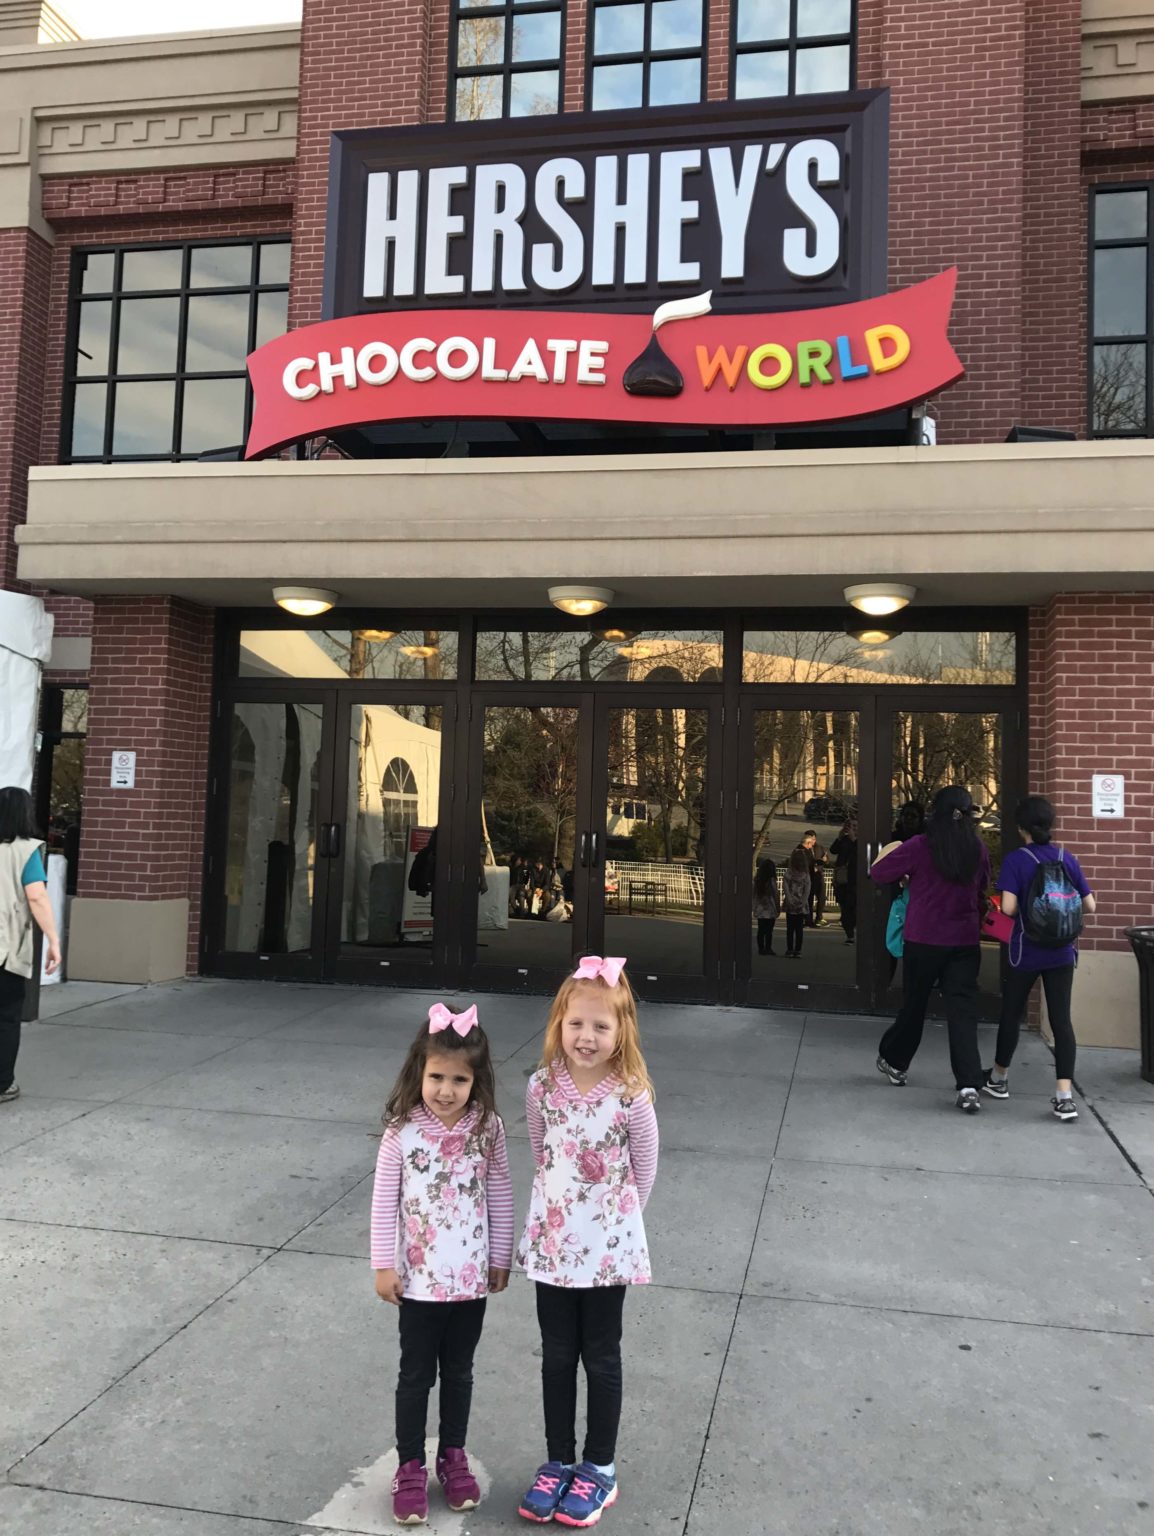 Another roadside attraction - Hershey's Chocolate World